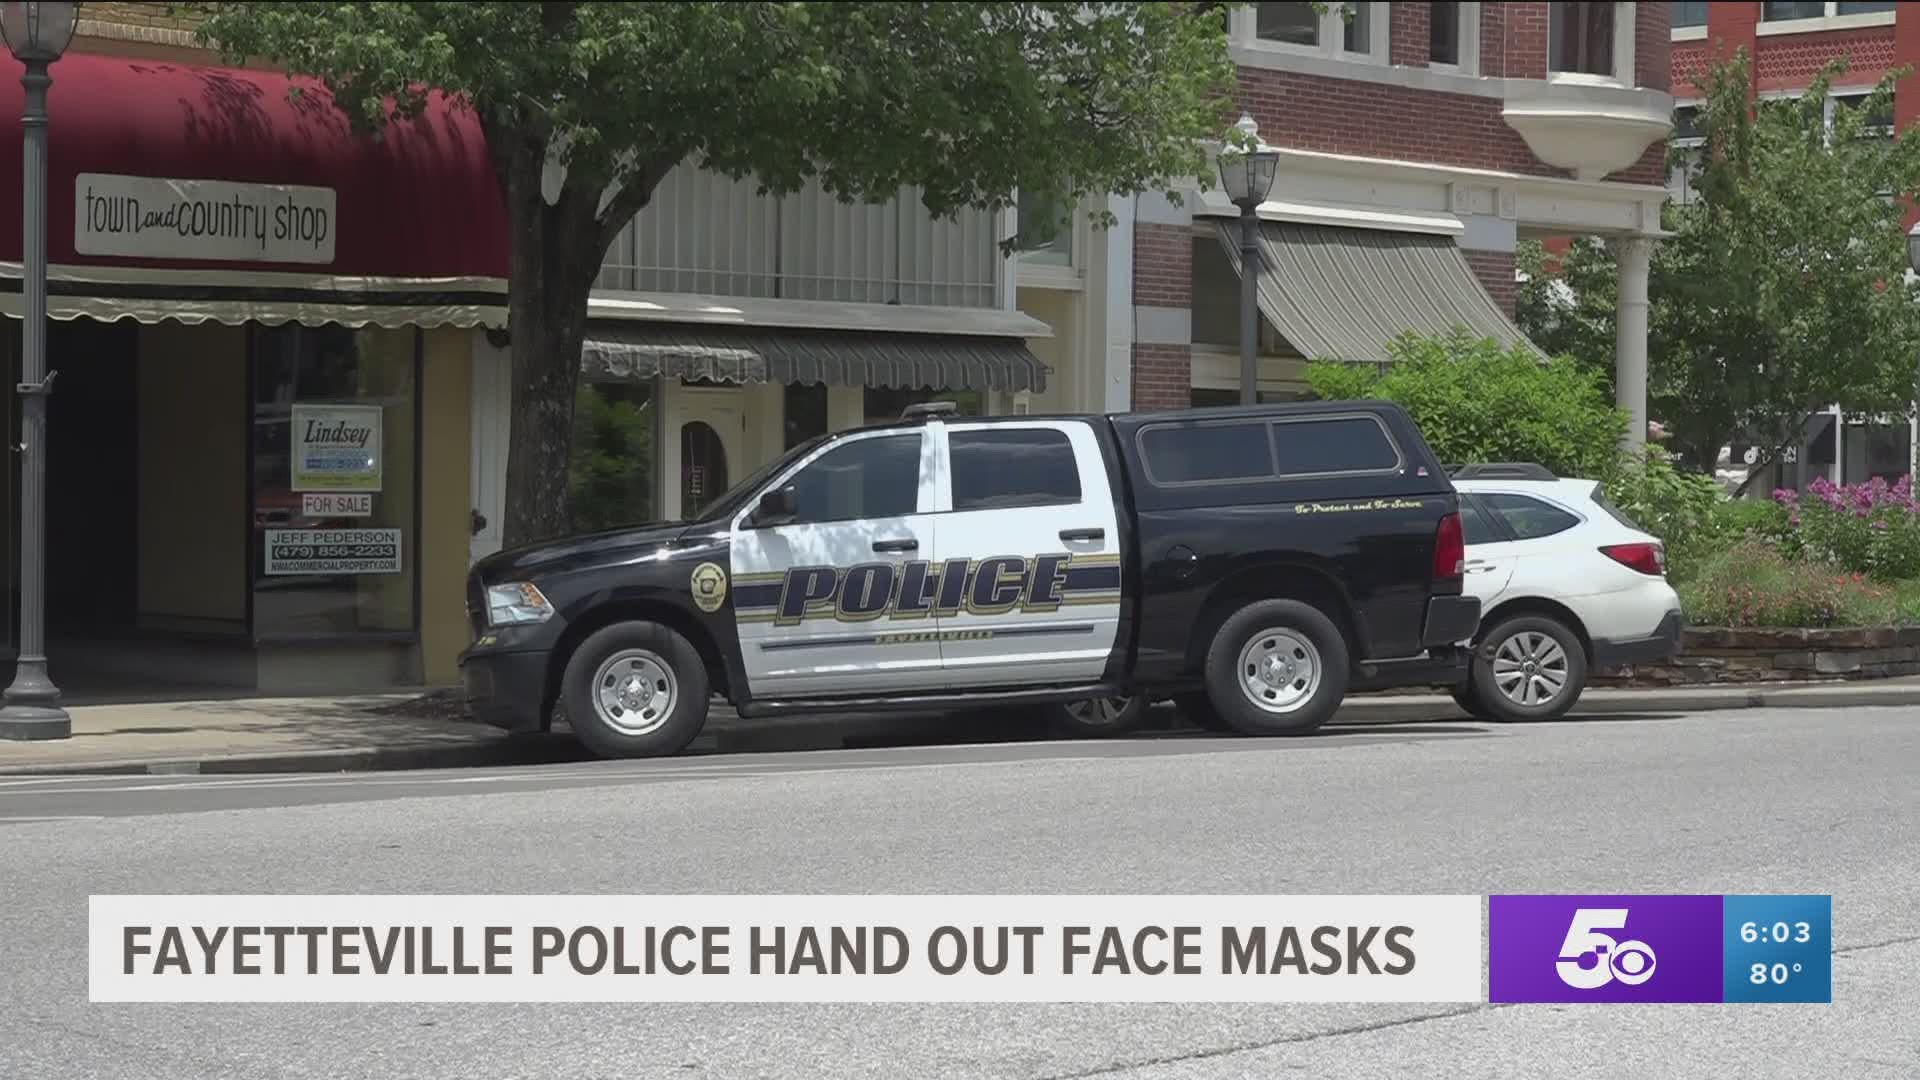 Fayetteville police hand out face masks.